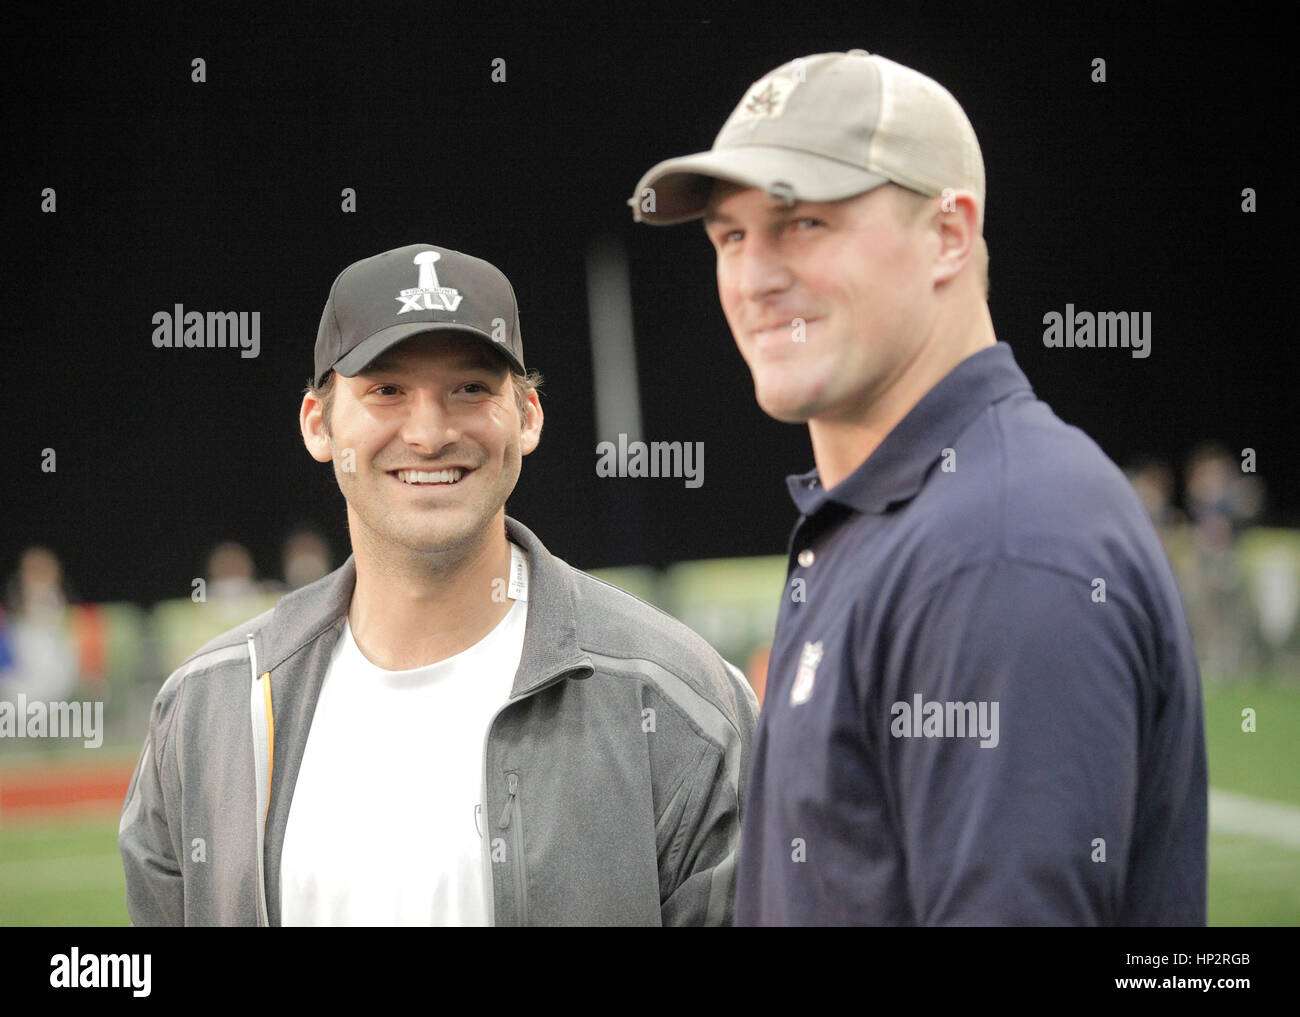 Dallas Cowboys quarterback Tony Romo, left, with teammate Jason Witten at the Tazon Latino flag football game at Super Bowl NFL Experience at the Dallas Convention Center on February 2, 2011 in Dallas, Texas. Photo by Francis Specker Stock Photo